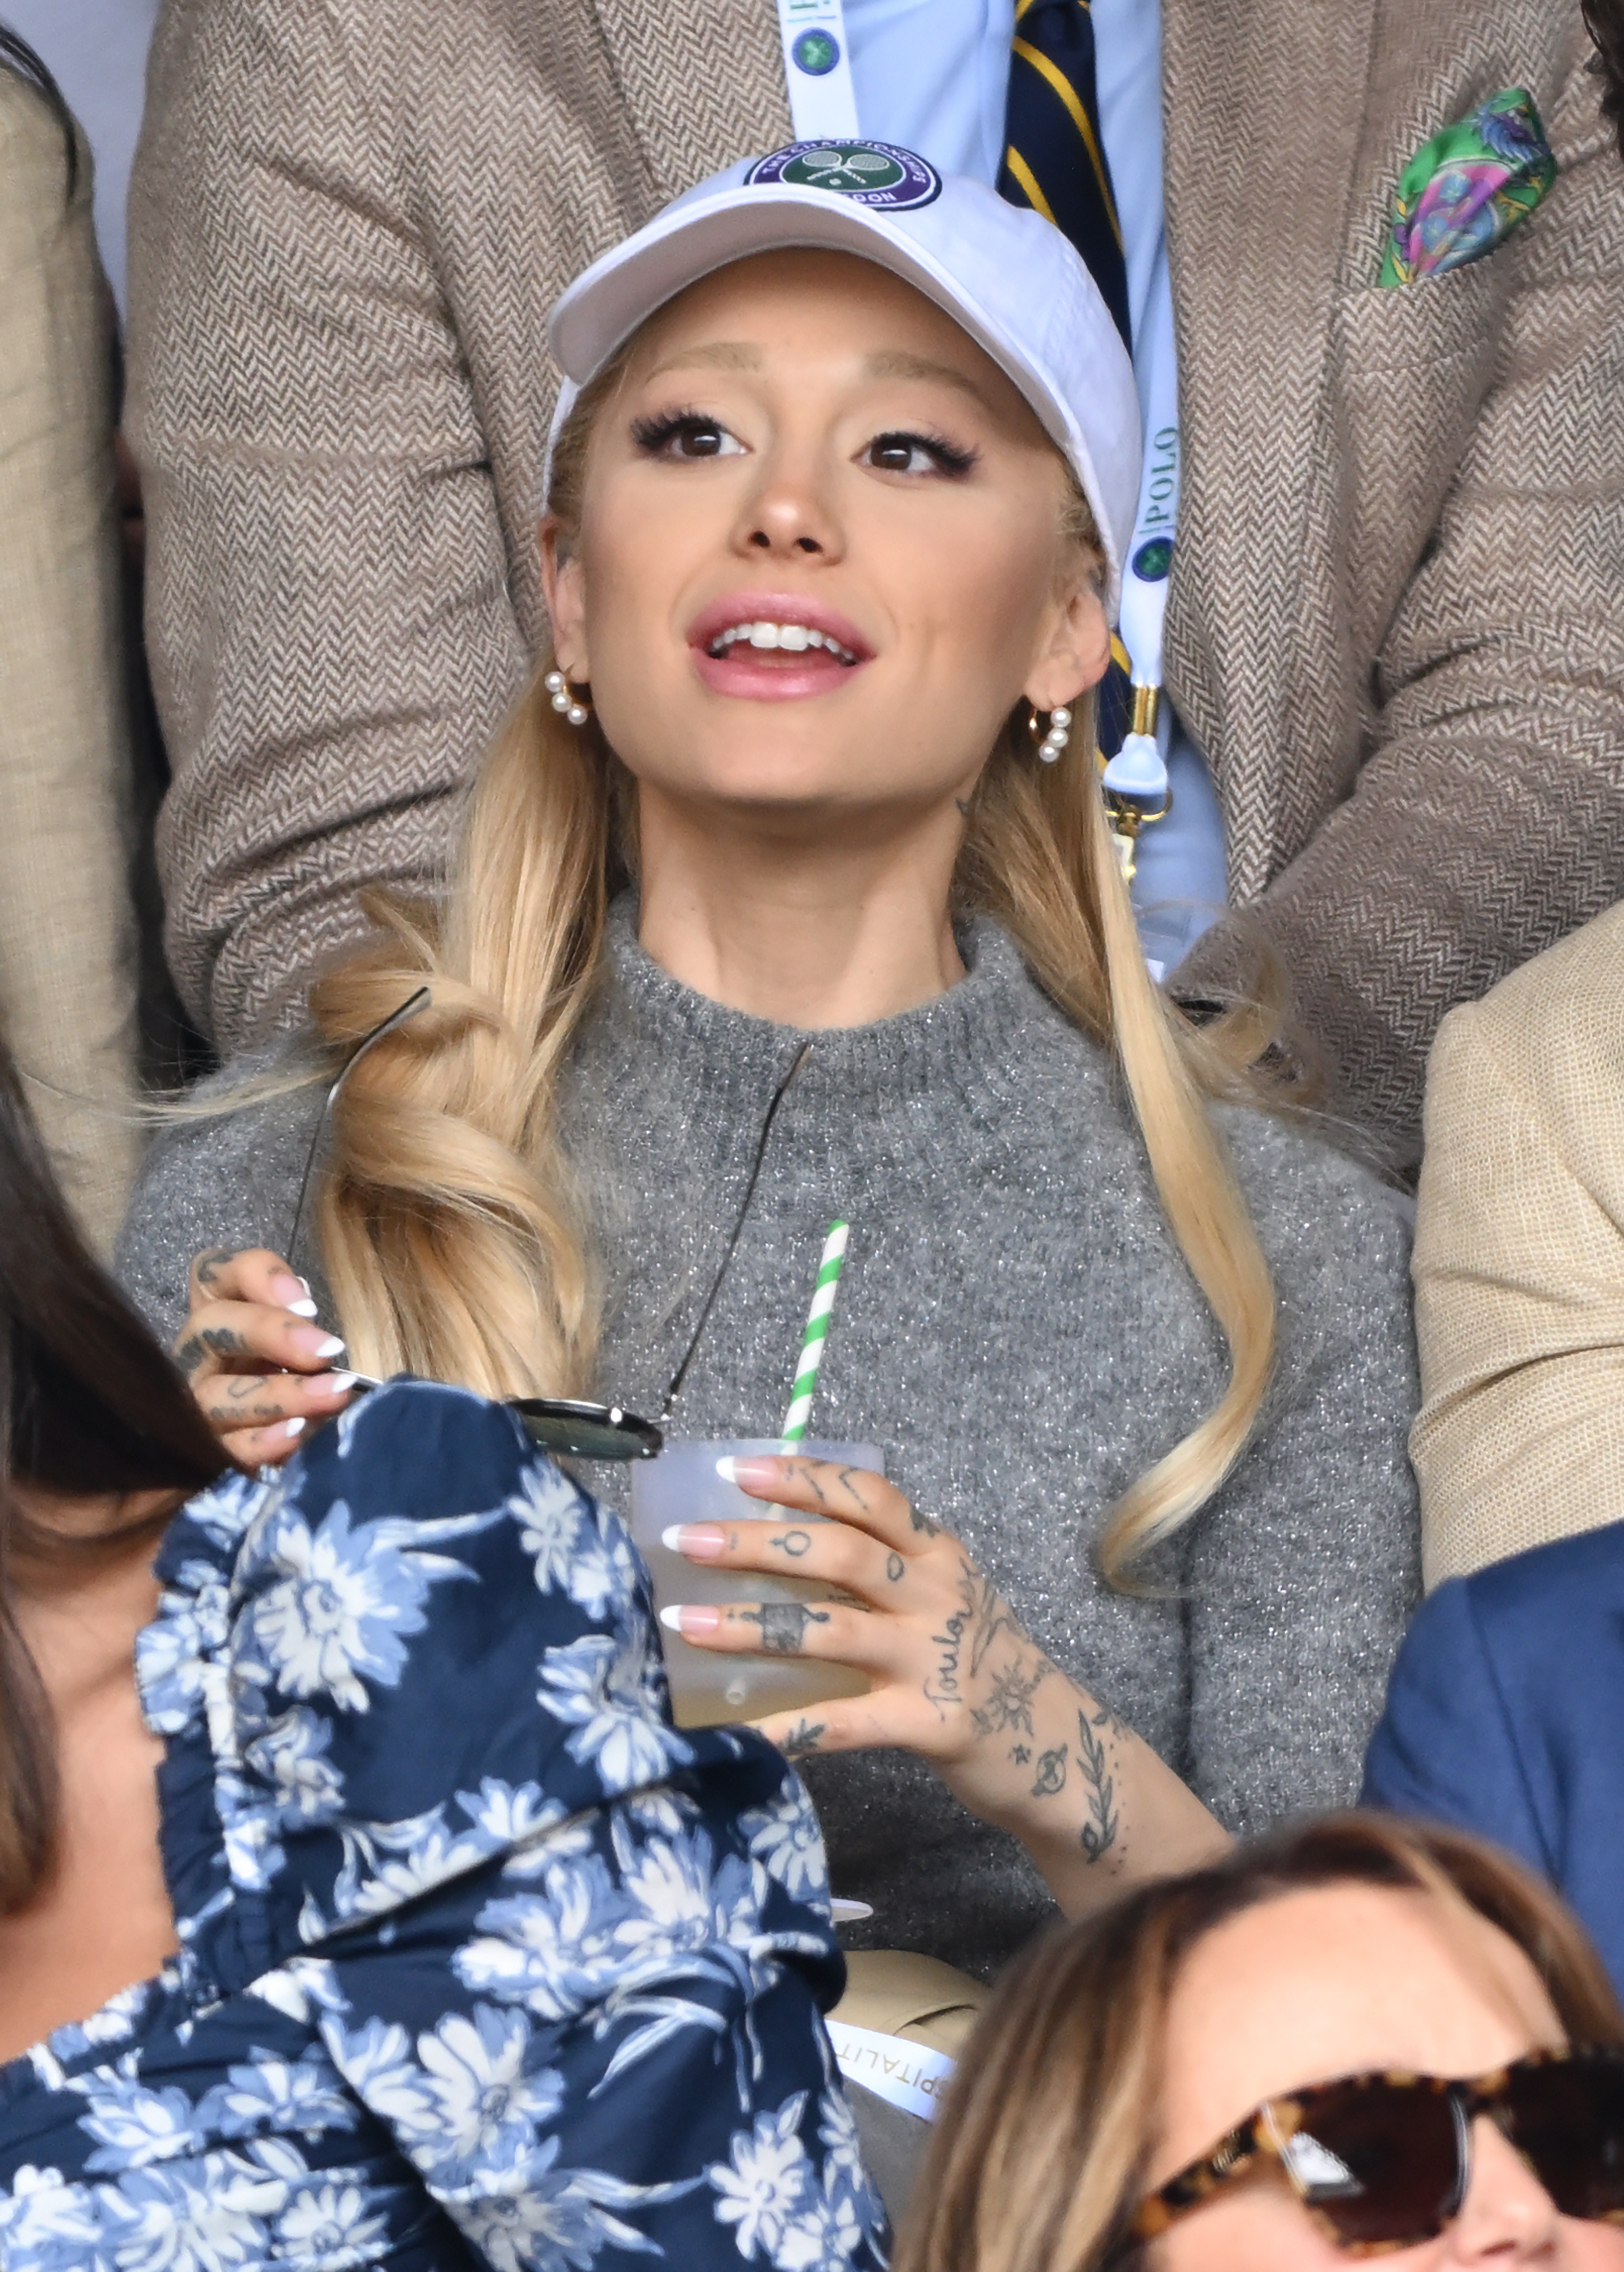 Close-up of Ariana sitting in a crowd and wearing a cap